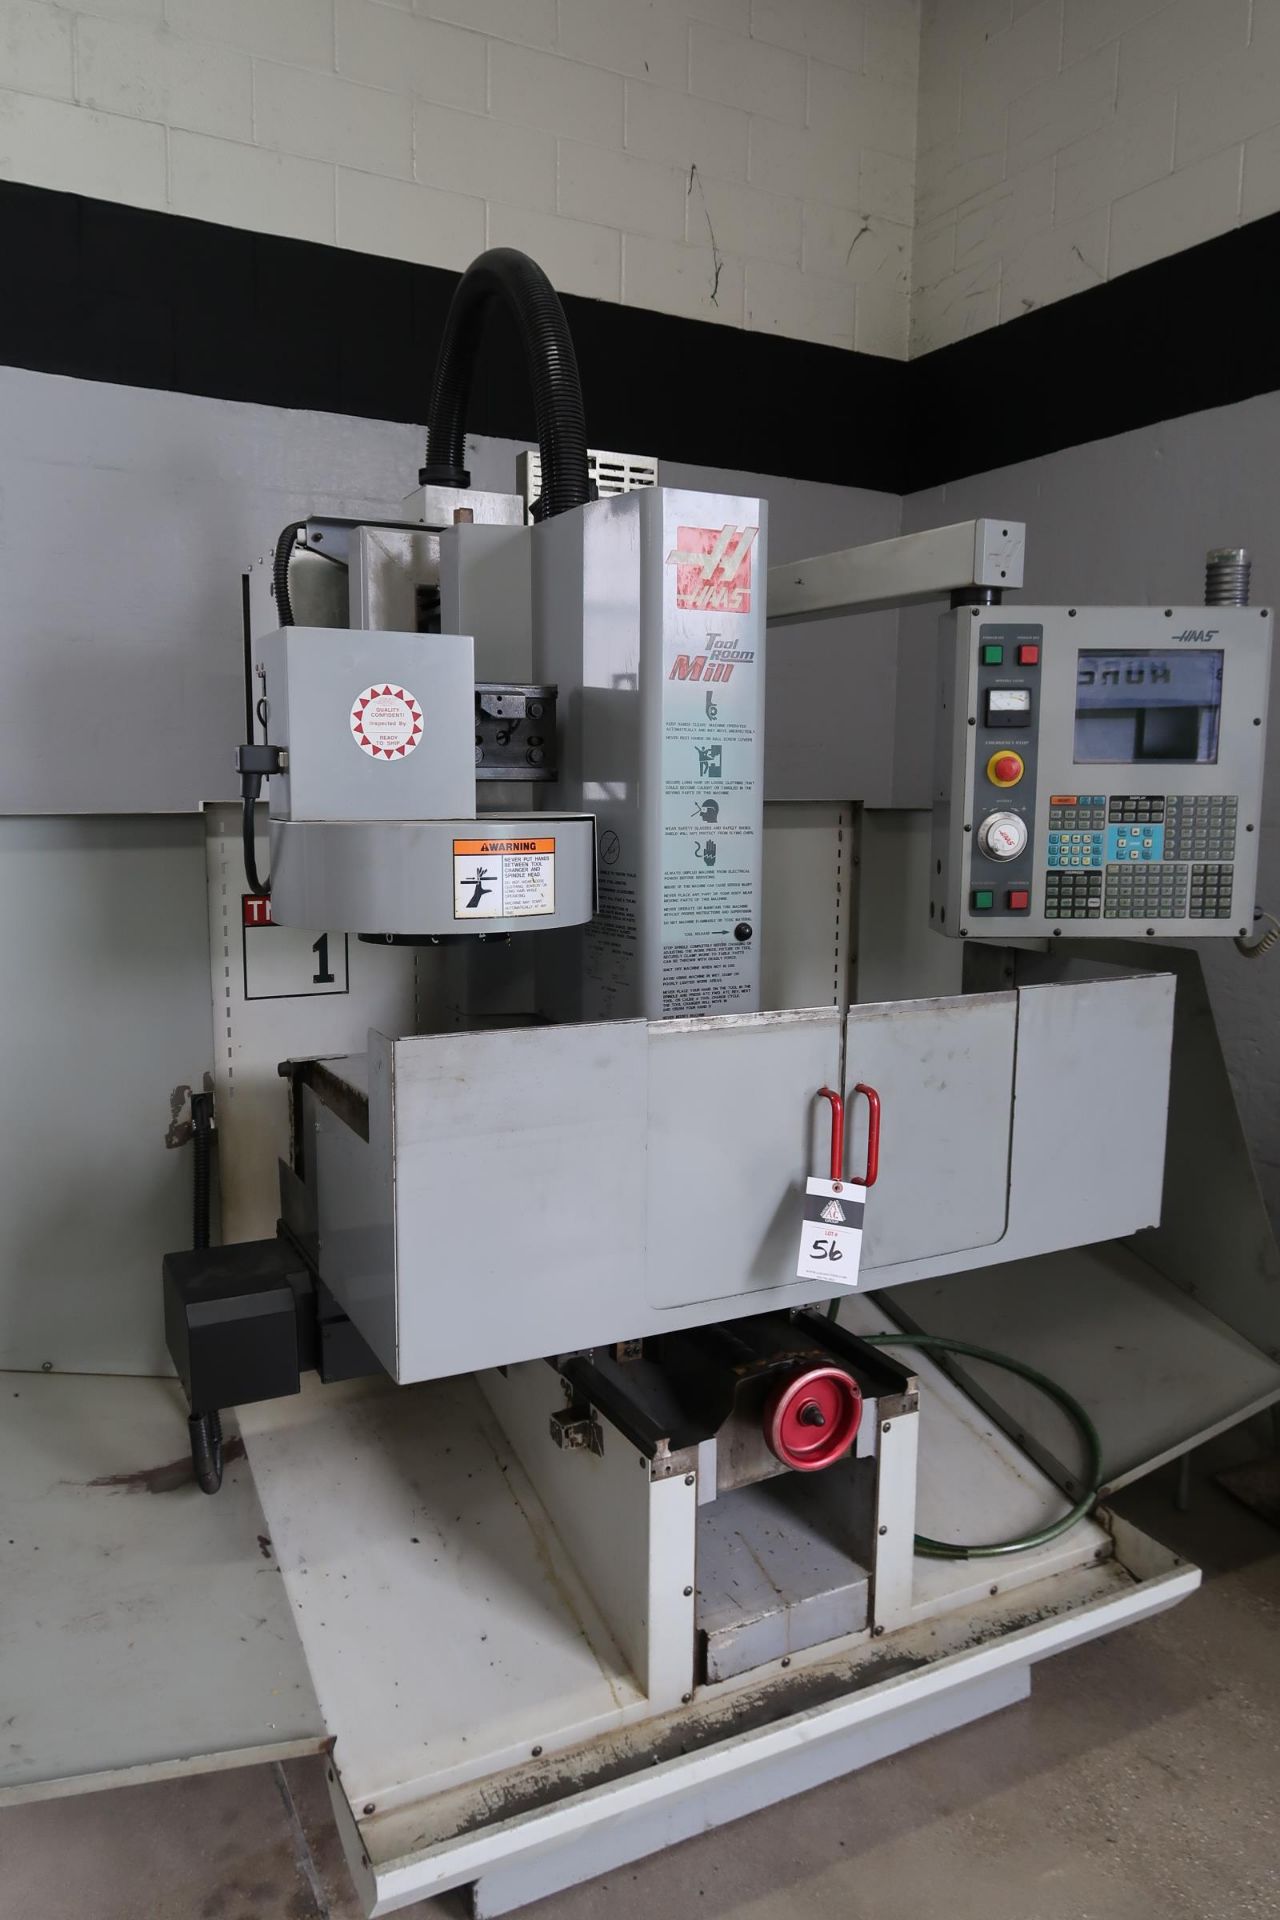 2003 Haas TM1 4-Axis CNC Tool Room Mill s/n 32804 w/ Haas Controls, 10- ATC, CAT-40, SOLD AS IS - Image 2 of 12